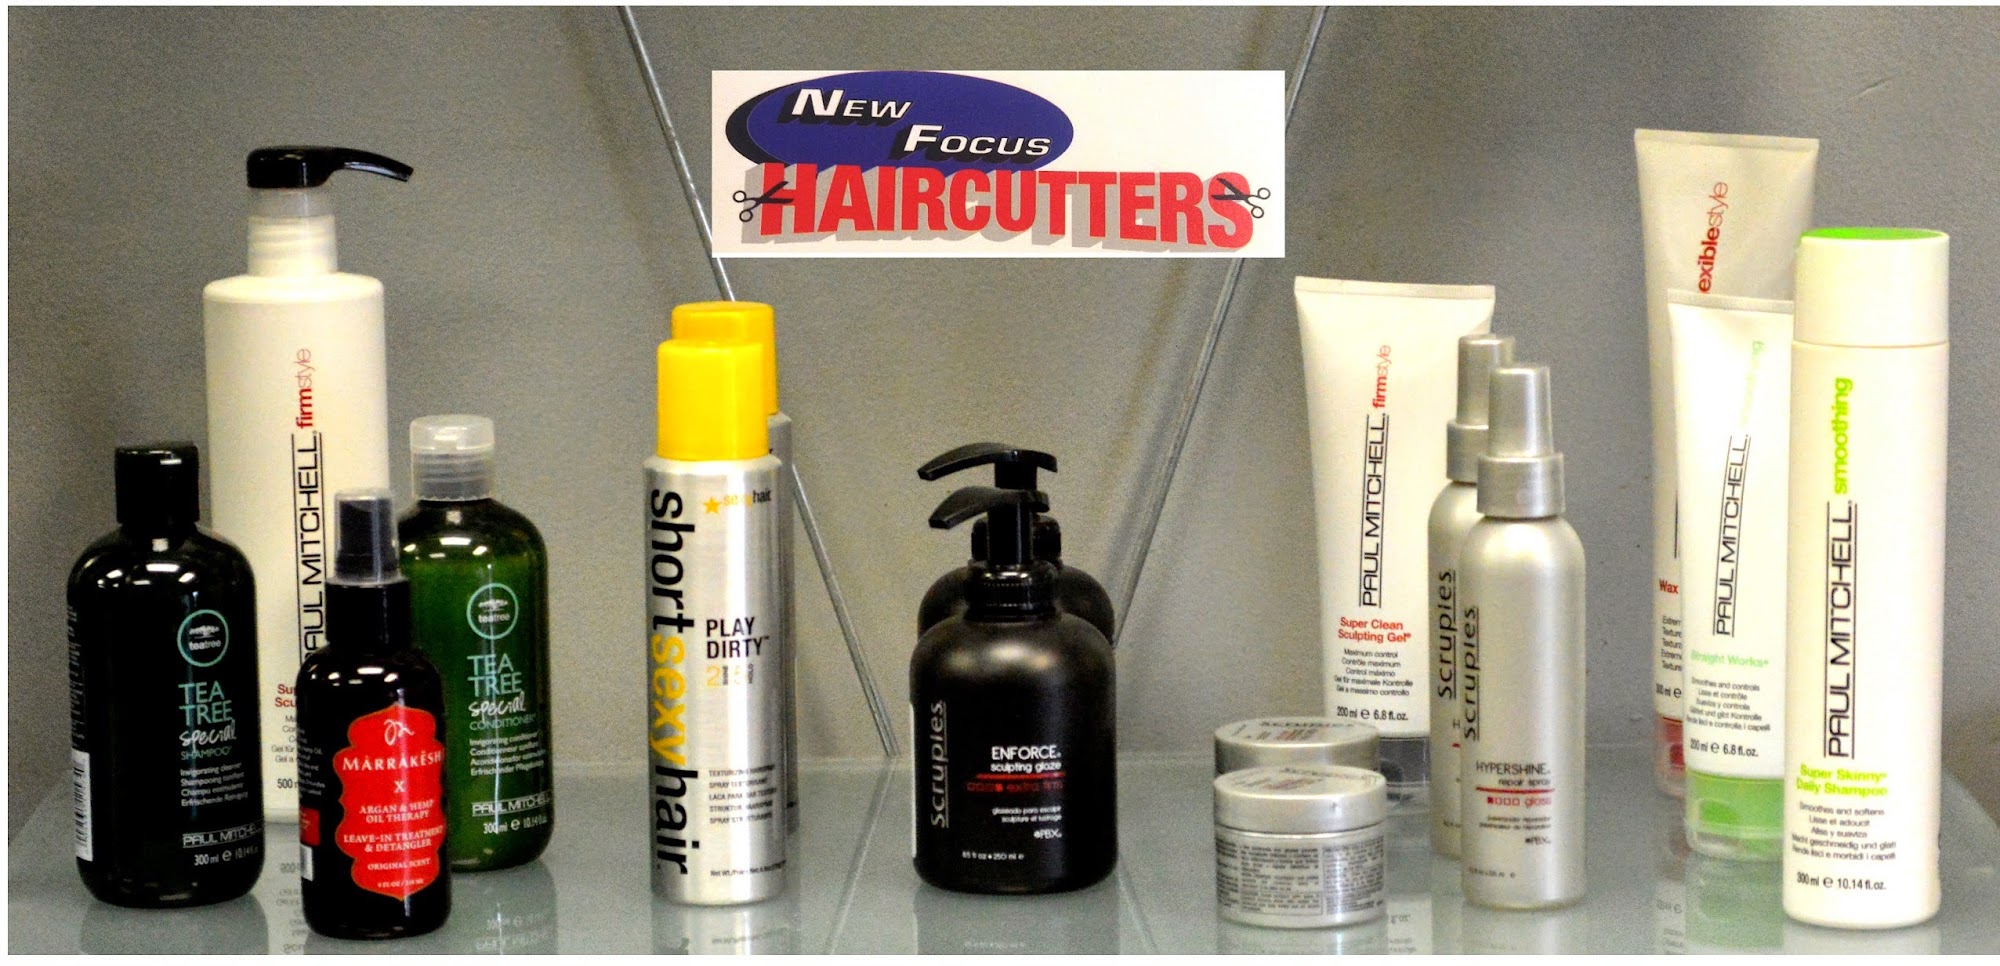 New Focus Haircutters 1616J Union Valley Rd, West Milford New Jersey 07480